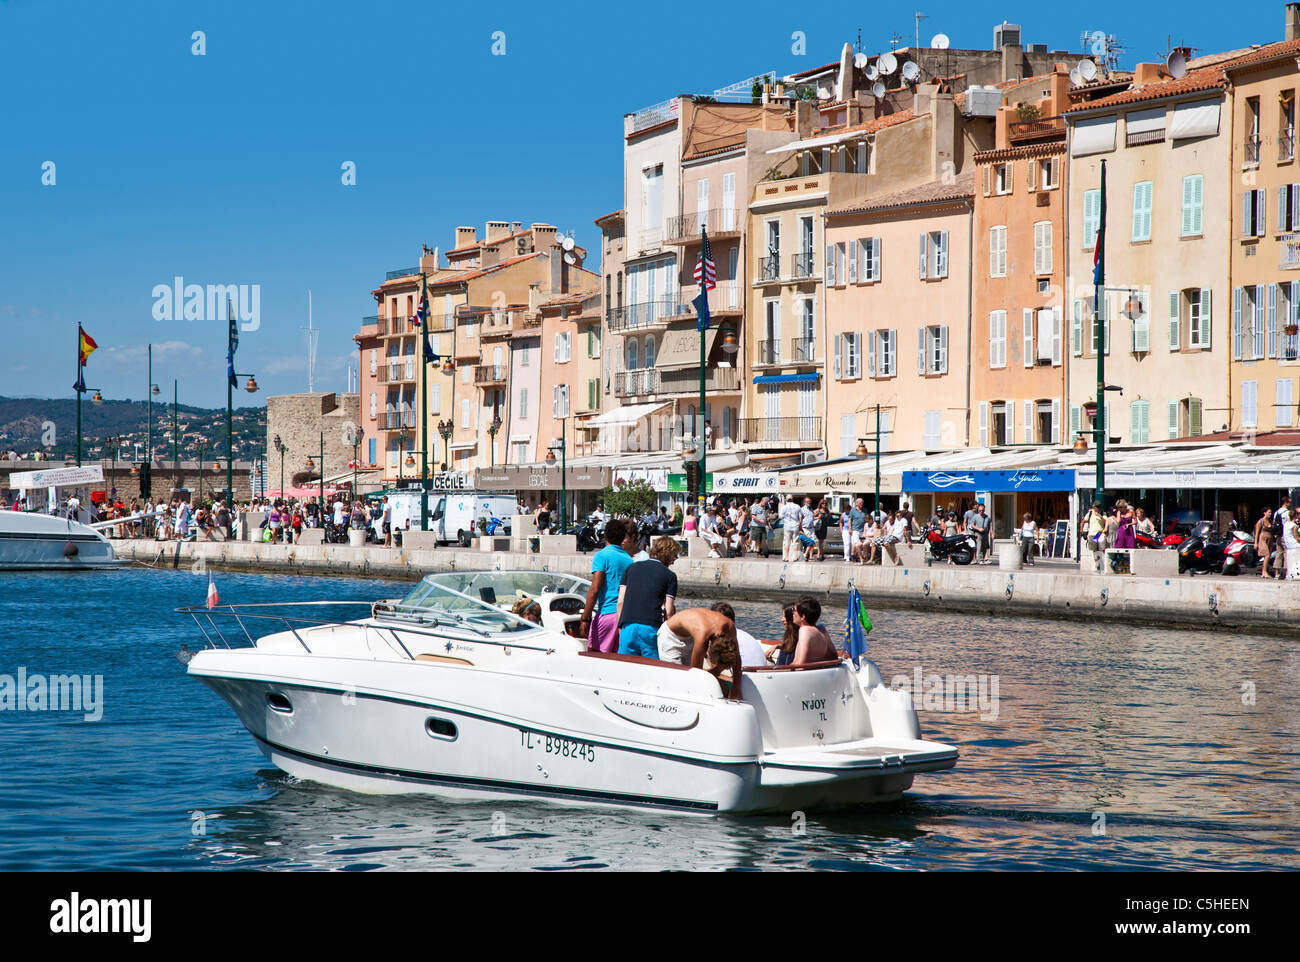 People on a small speed boat, Saint Tropez, Cote d'Azure, Provence ...